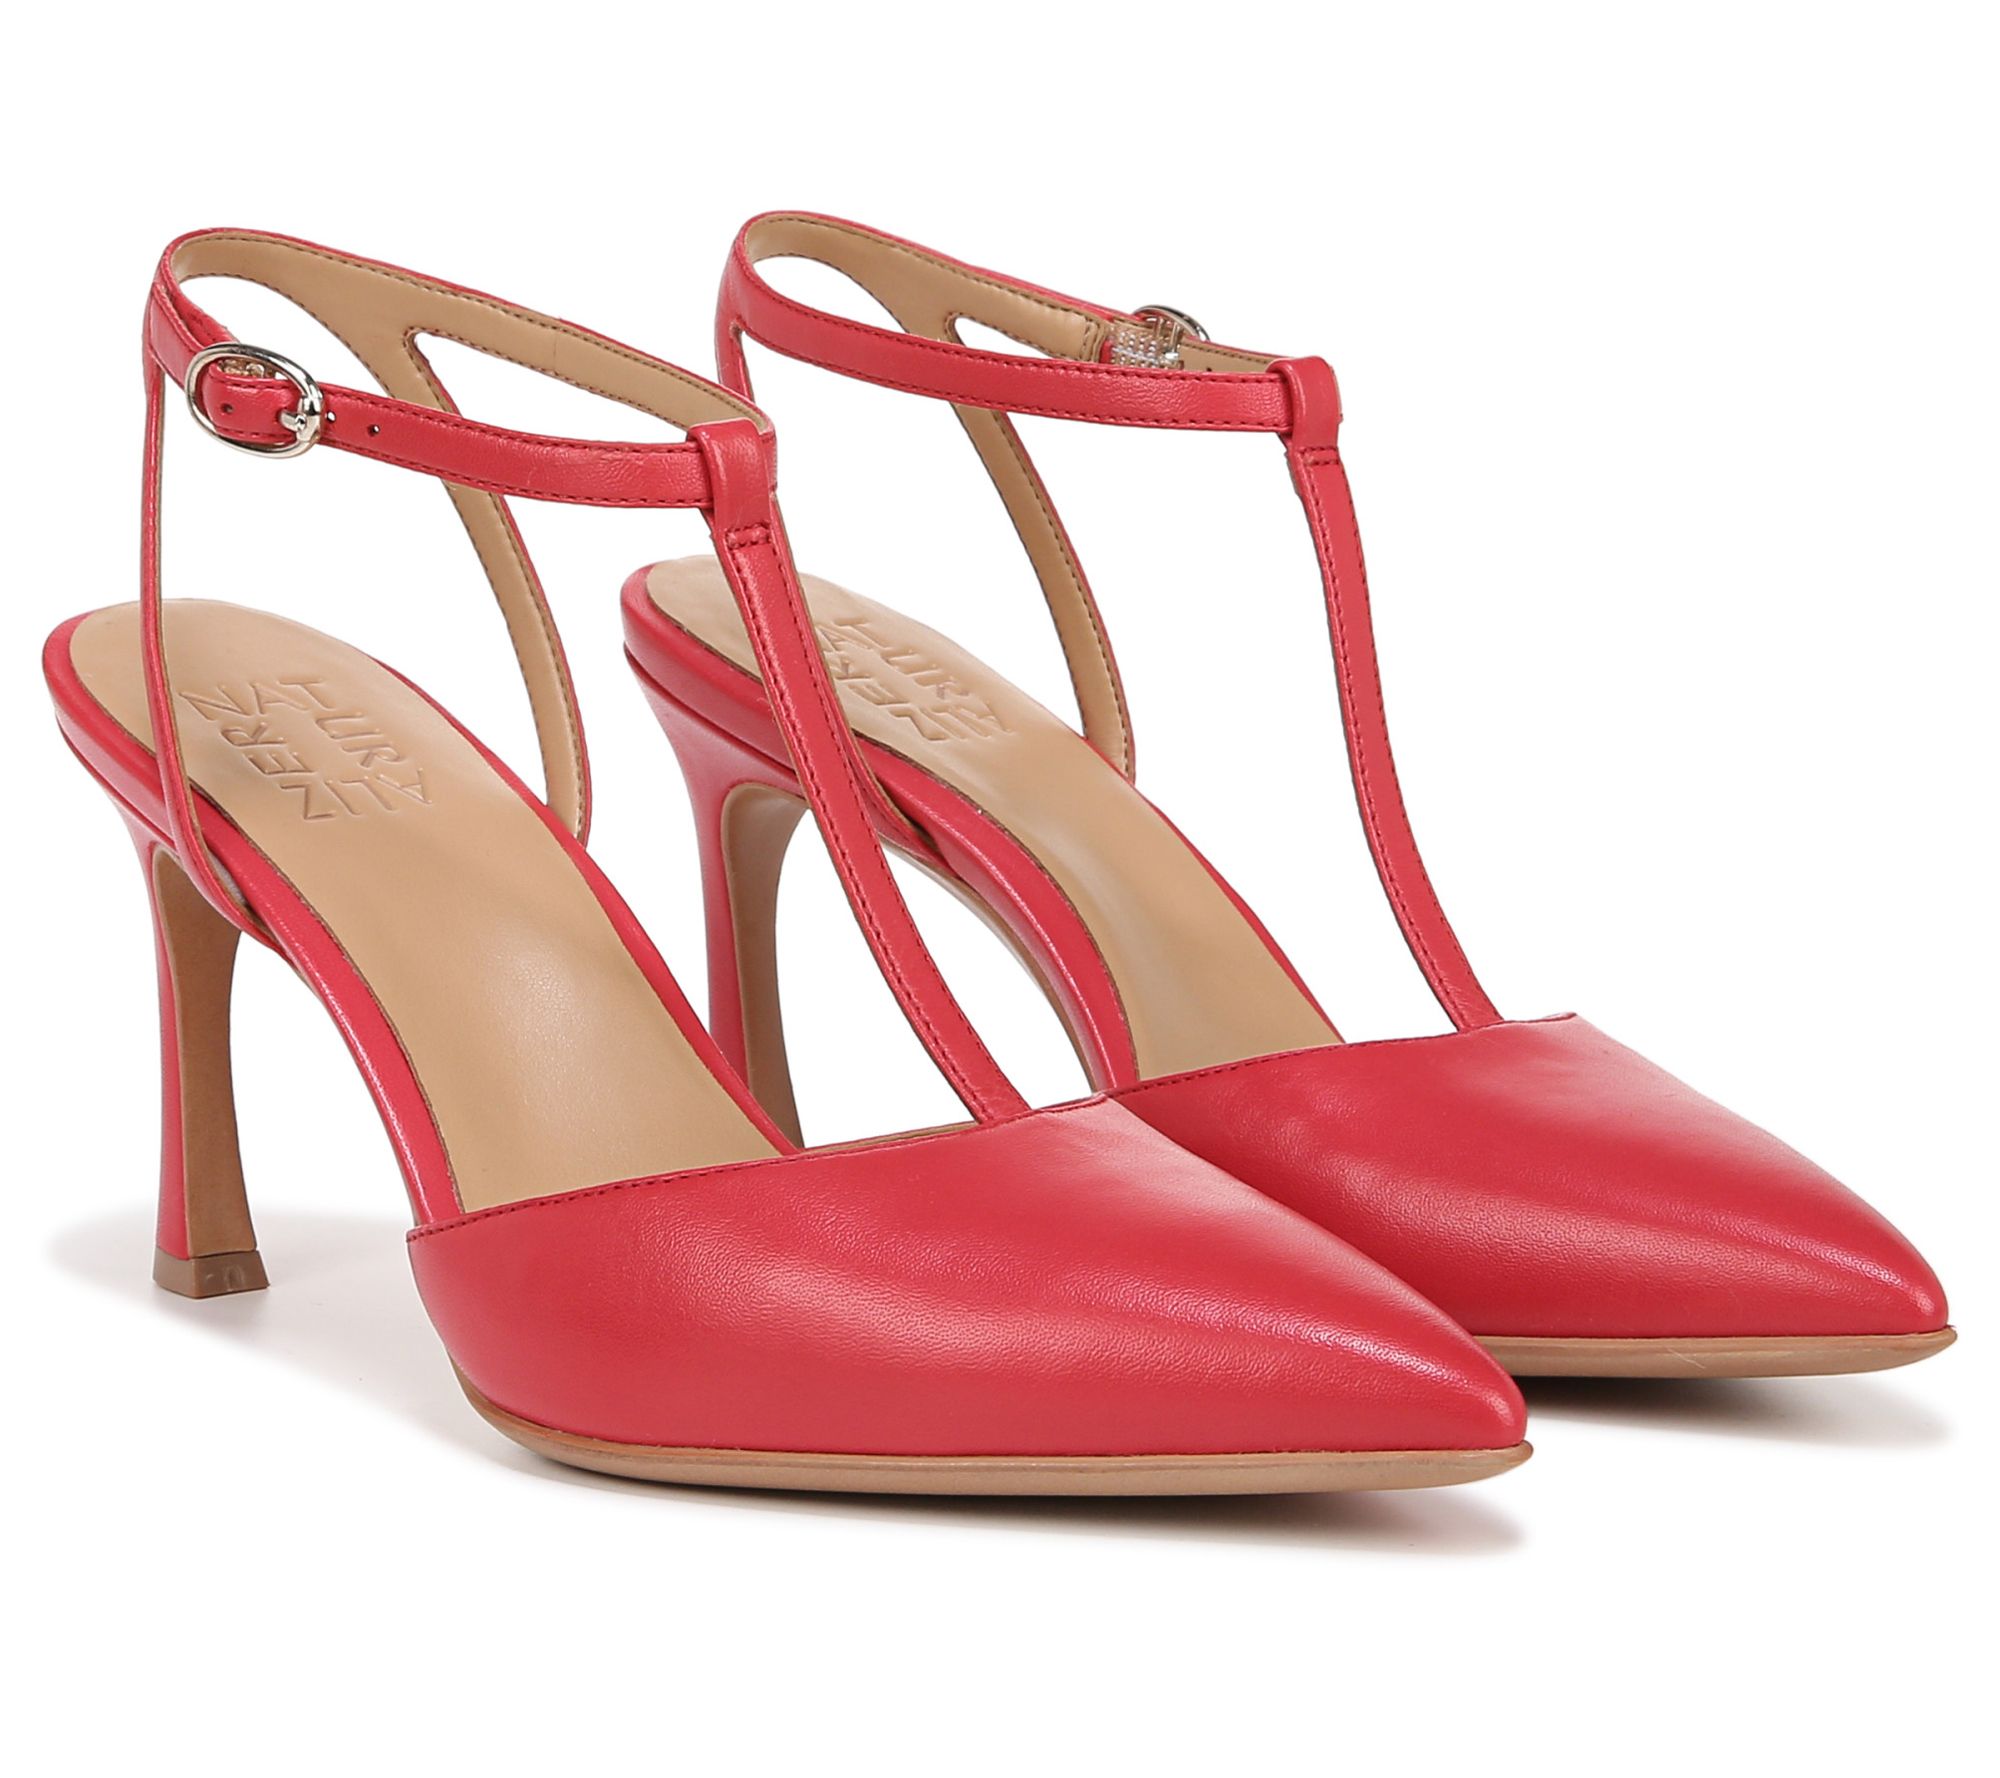 Naturalizer Ankle Strap Pointed Toe Pumps - Ast id - QVC.com